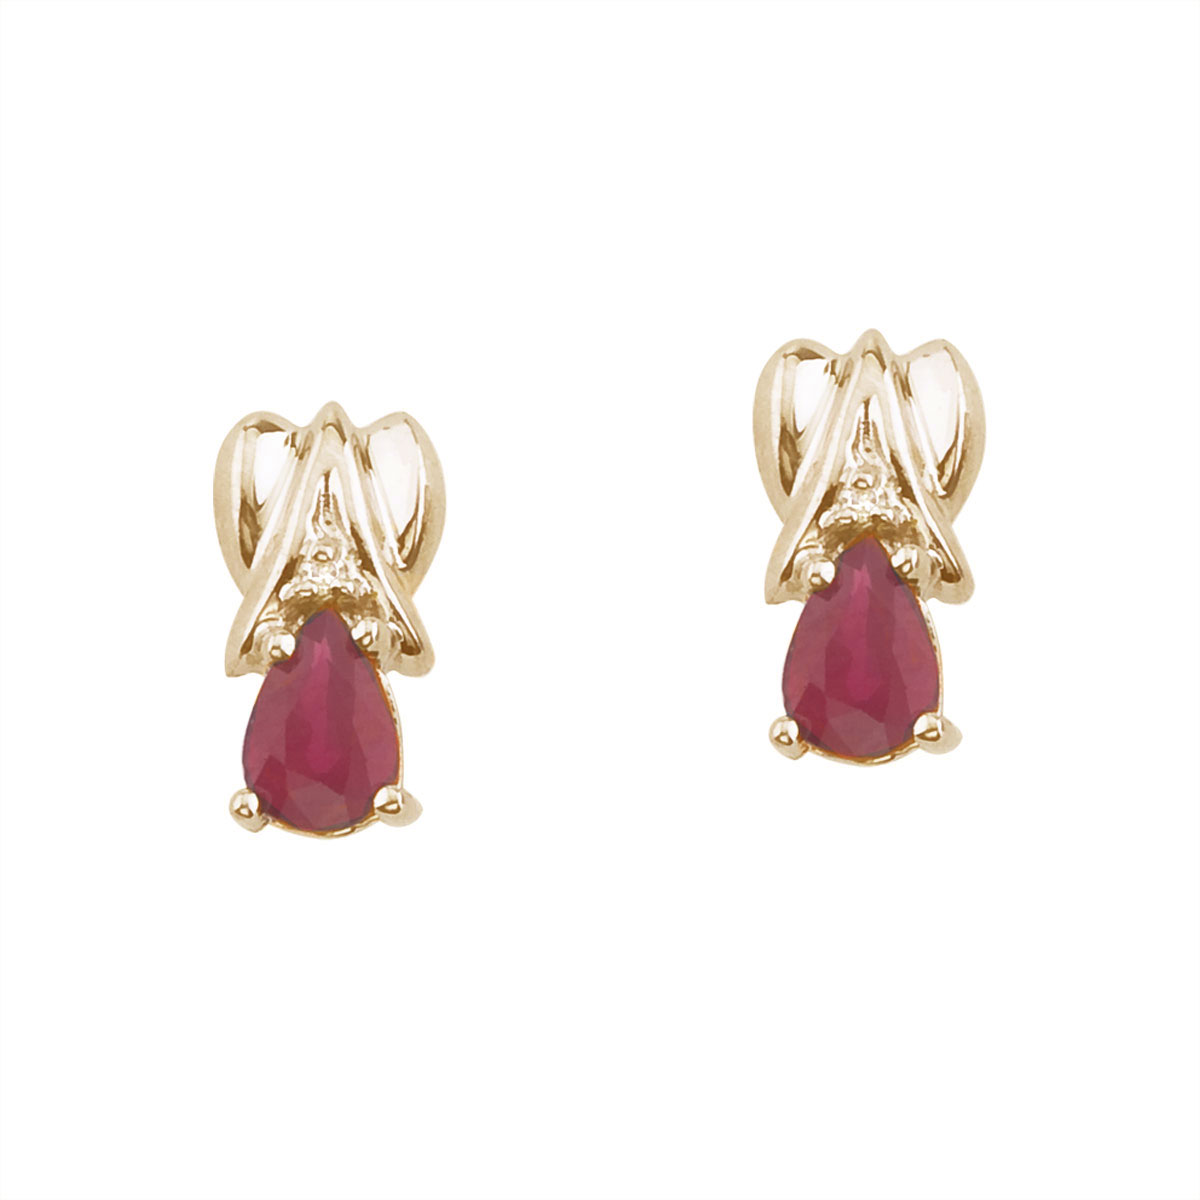 JCX2291: 14k yellow gold stud earrings with 6x4 mm pear rubies and bright diamond accents.